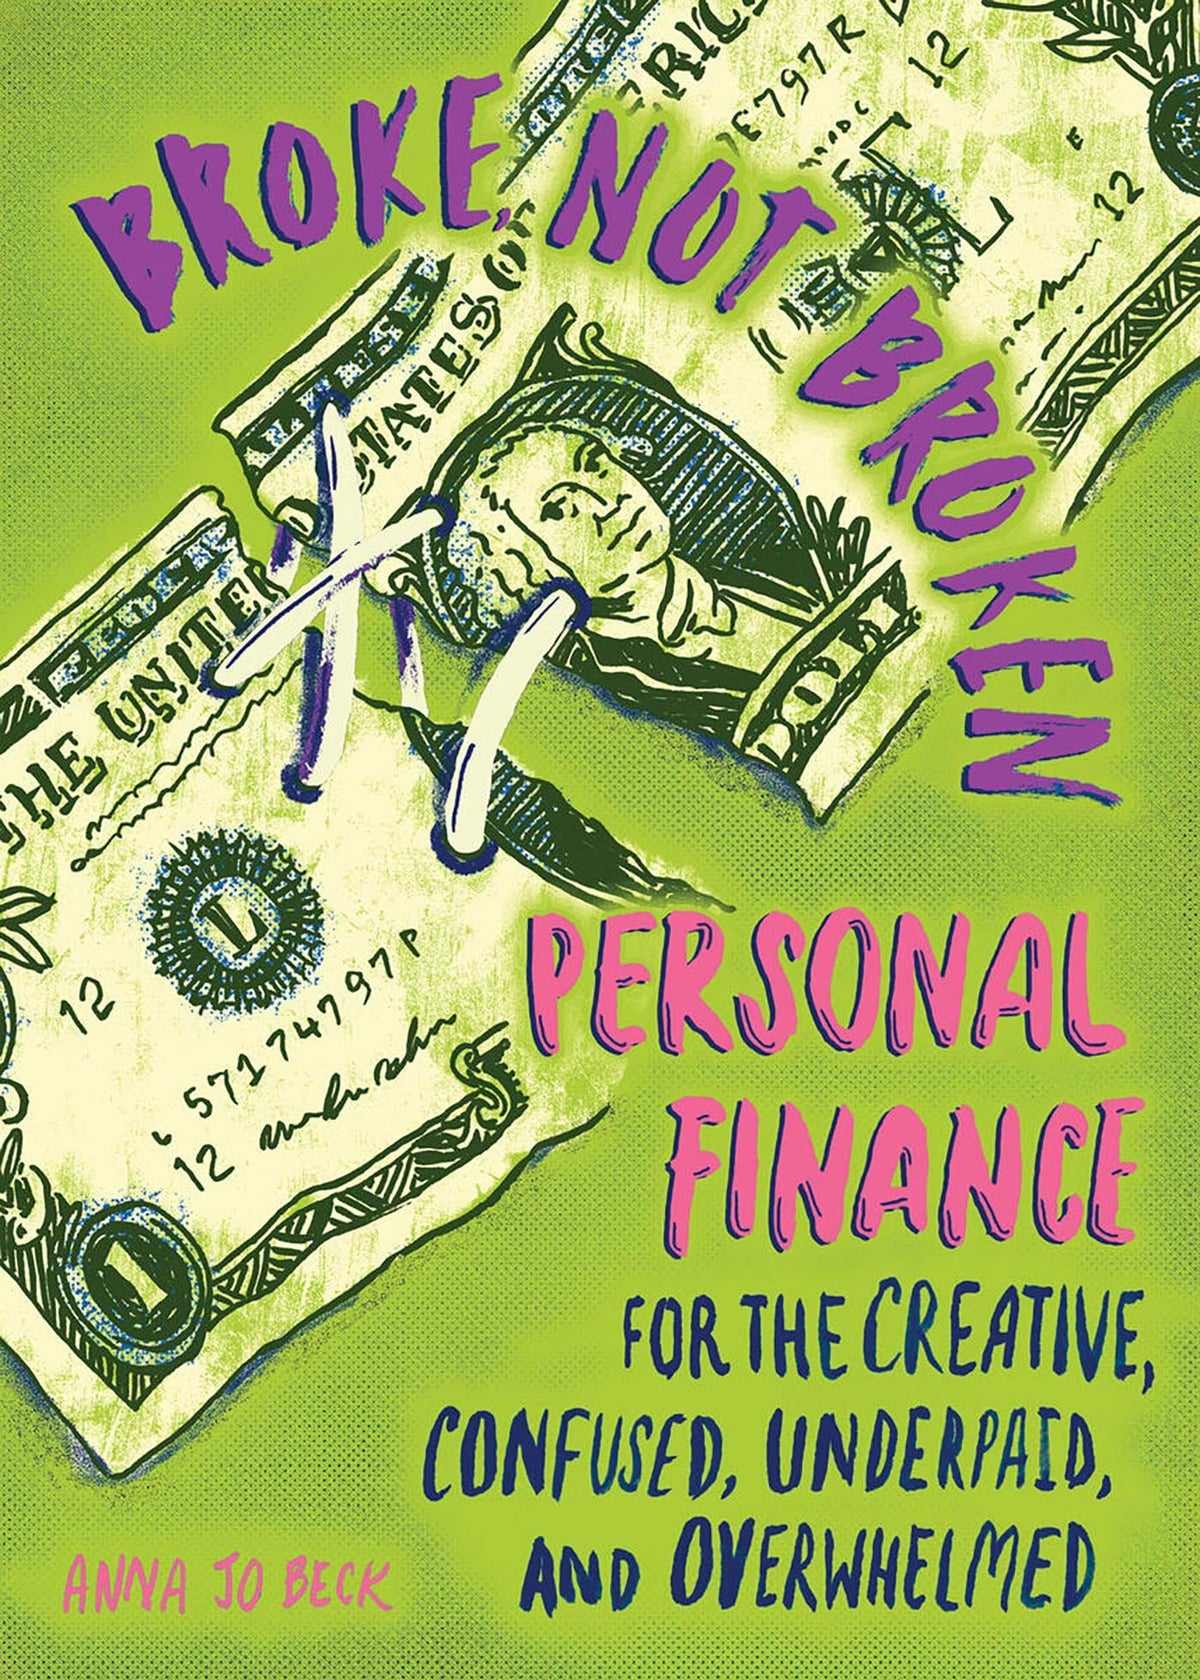 Broke Not Broken: Personal Finance for the Creative Confused Underpaid and Overwhelmed - Third Eye